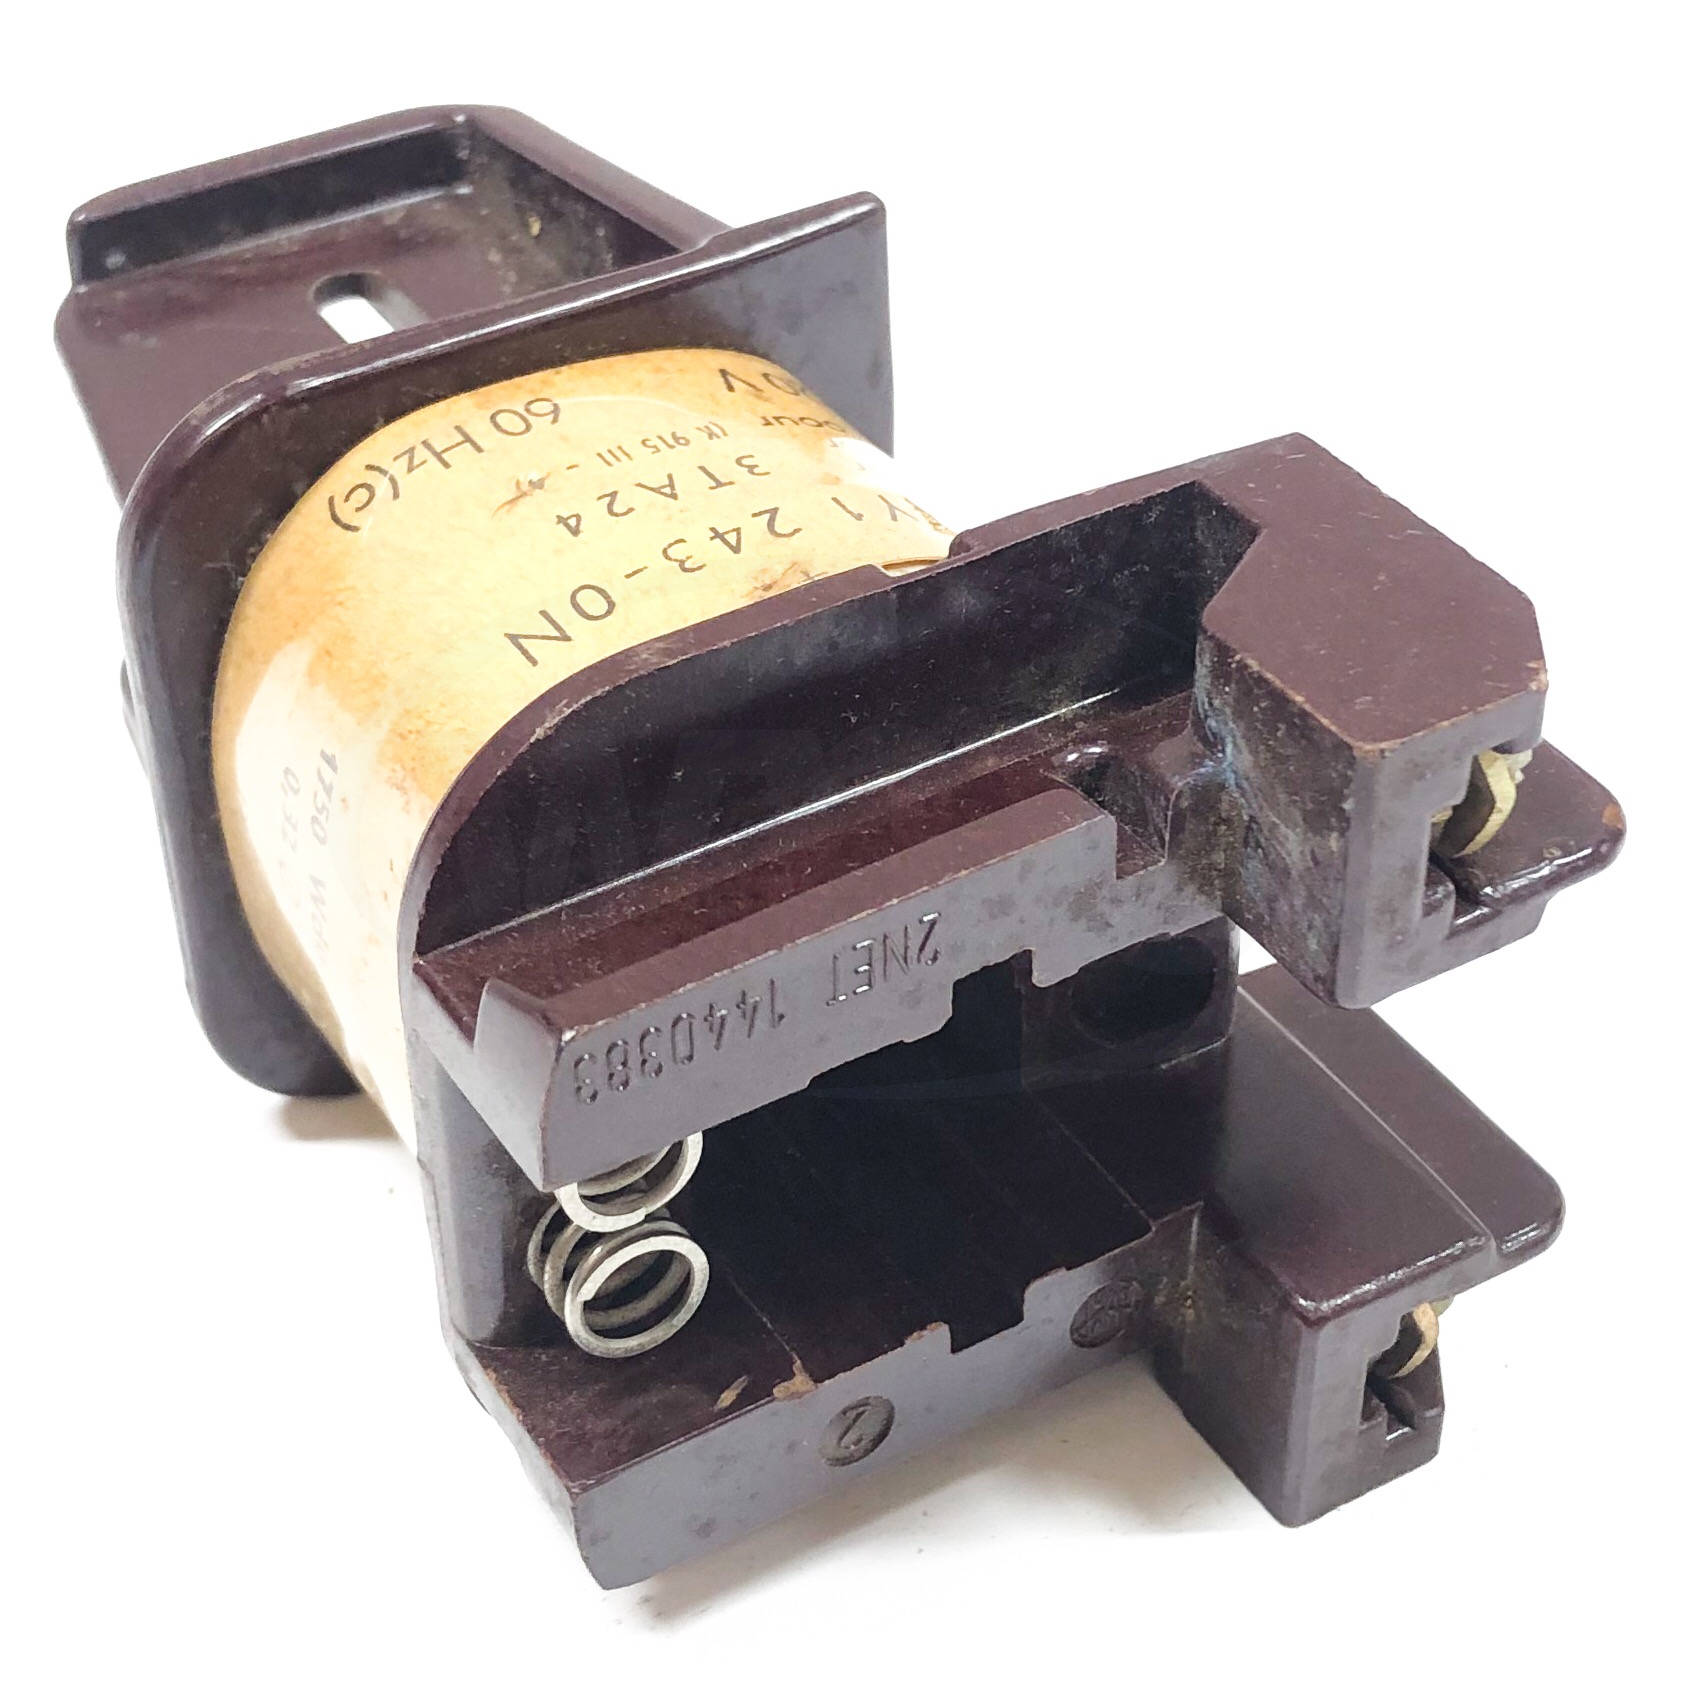 3TY1 243-0N Siemens Contactor Coil, For 3TA24, 220 V, 60 Hz 3